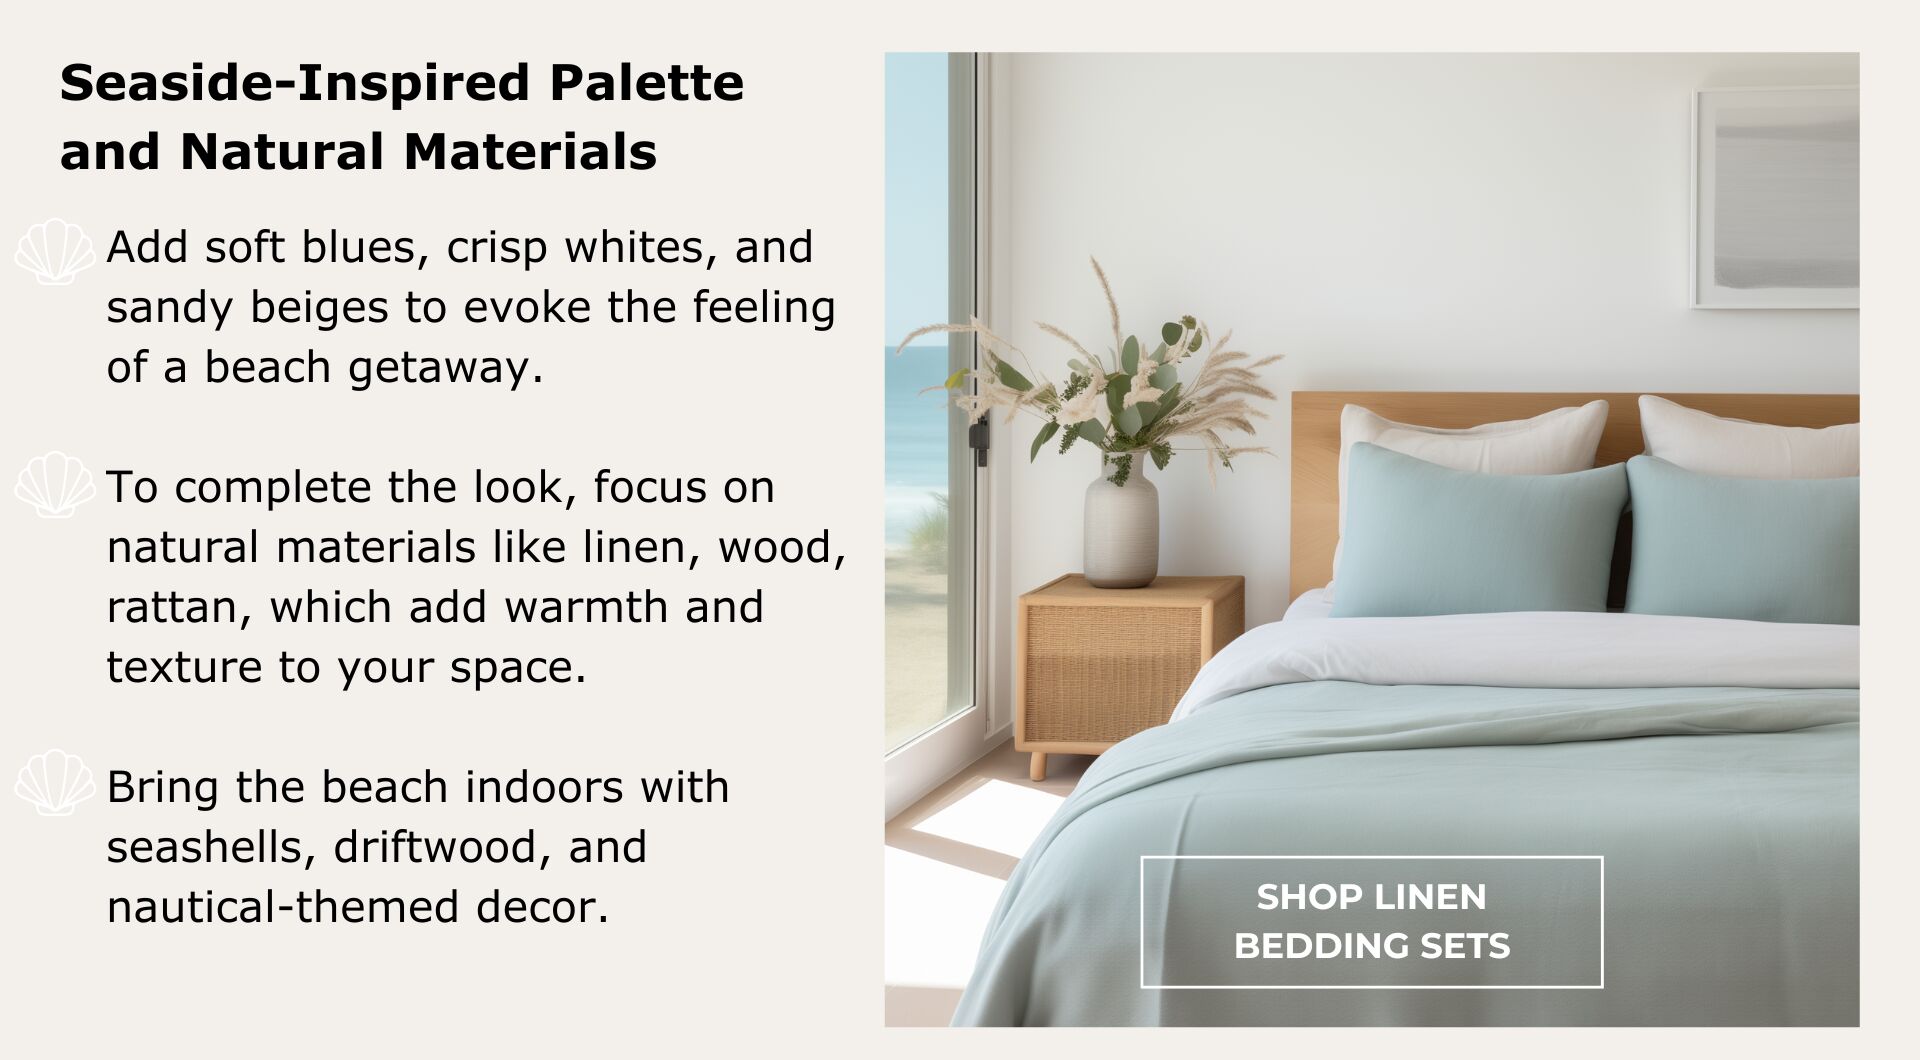 Shop Linen Bedding Sets. Focus on natural materials like linen, wood,  rattan, which add warmth and texture to your space. Bring the beach indoors with seashells, driftwood, and nautical-themed decor.